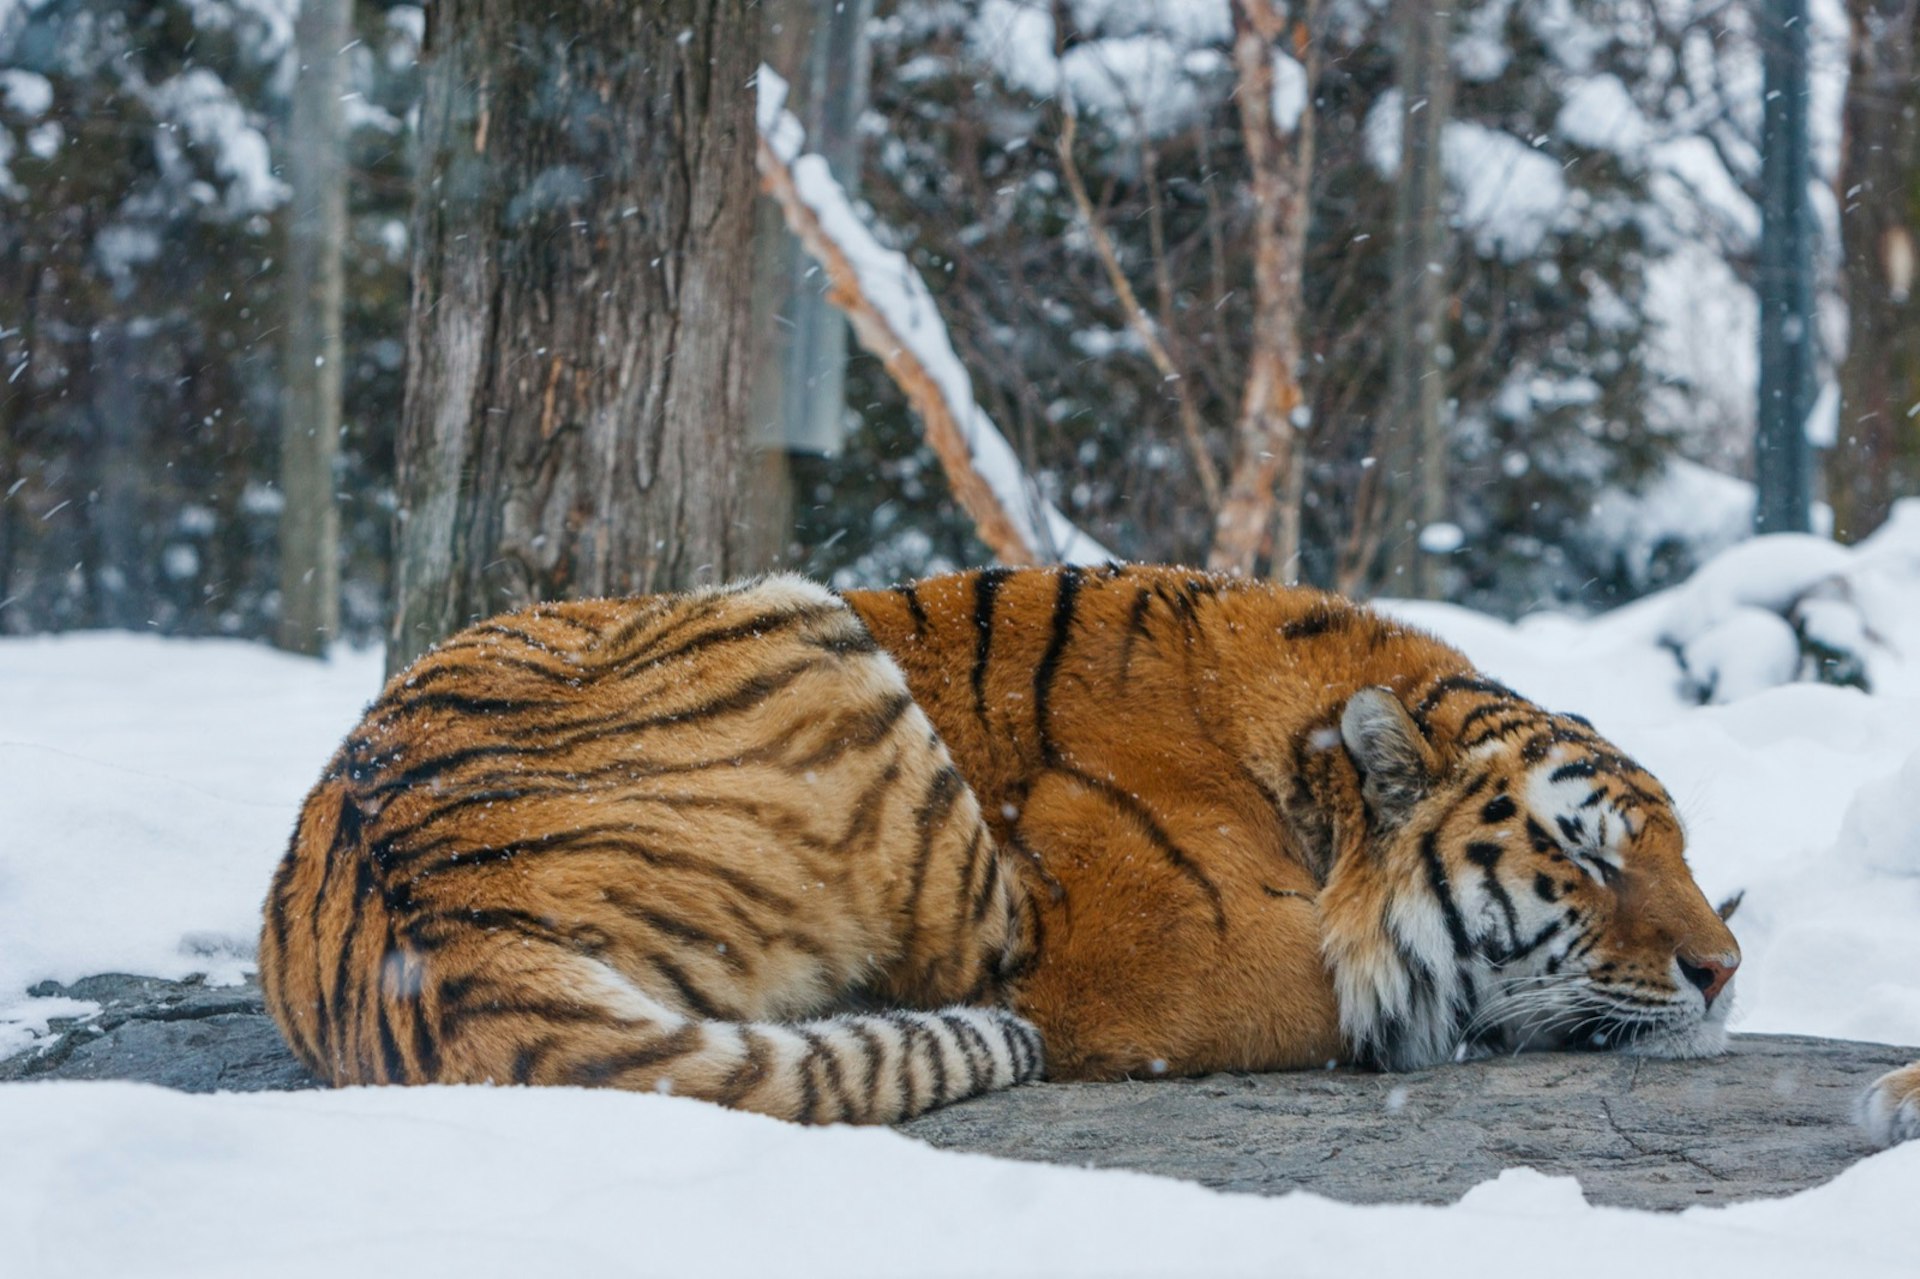 Siberian Tiger dozing off in snowfall in a zoo near Montreal. Best day trips from Montréal